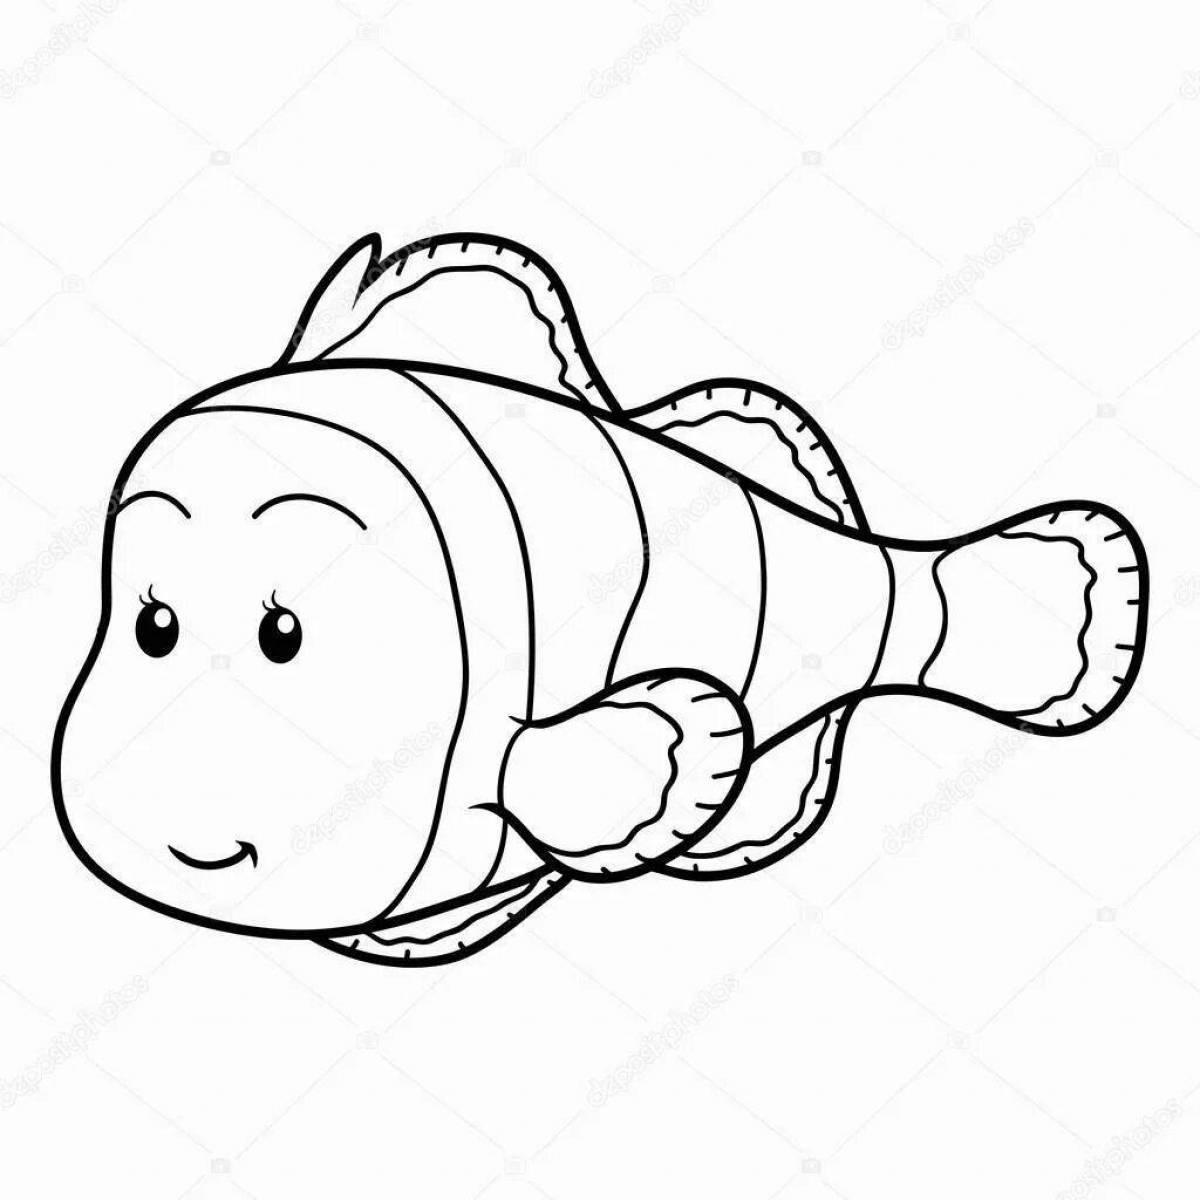 Exciting clown fish coloring page for kids